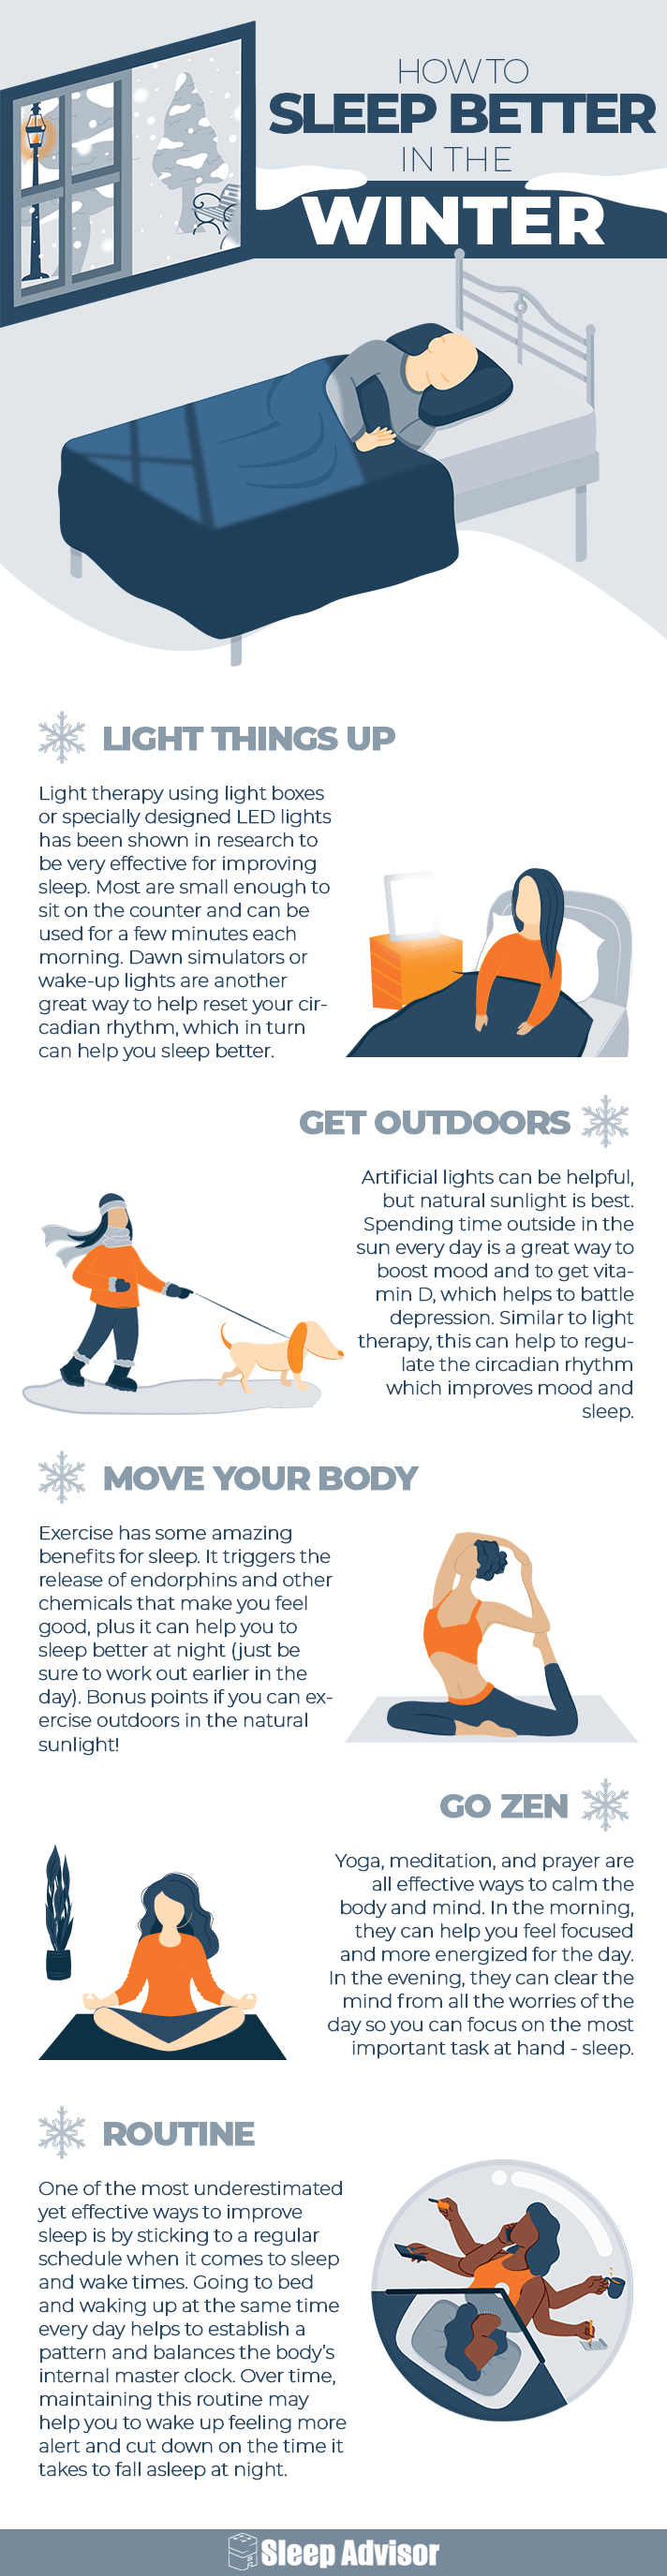 How to Sleep Better in the Winter Infographic